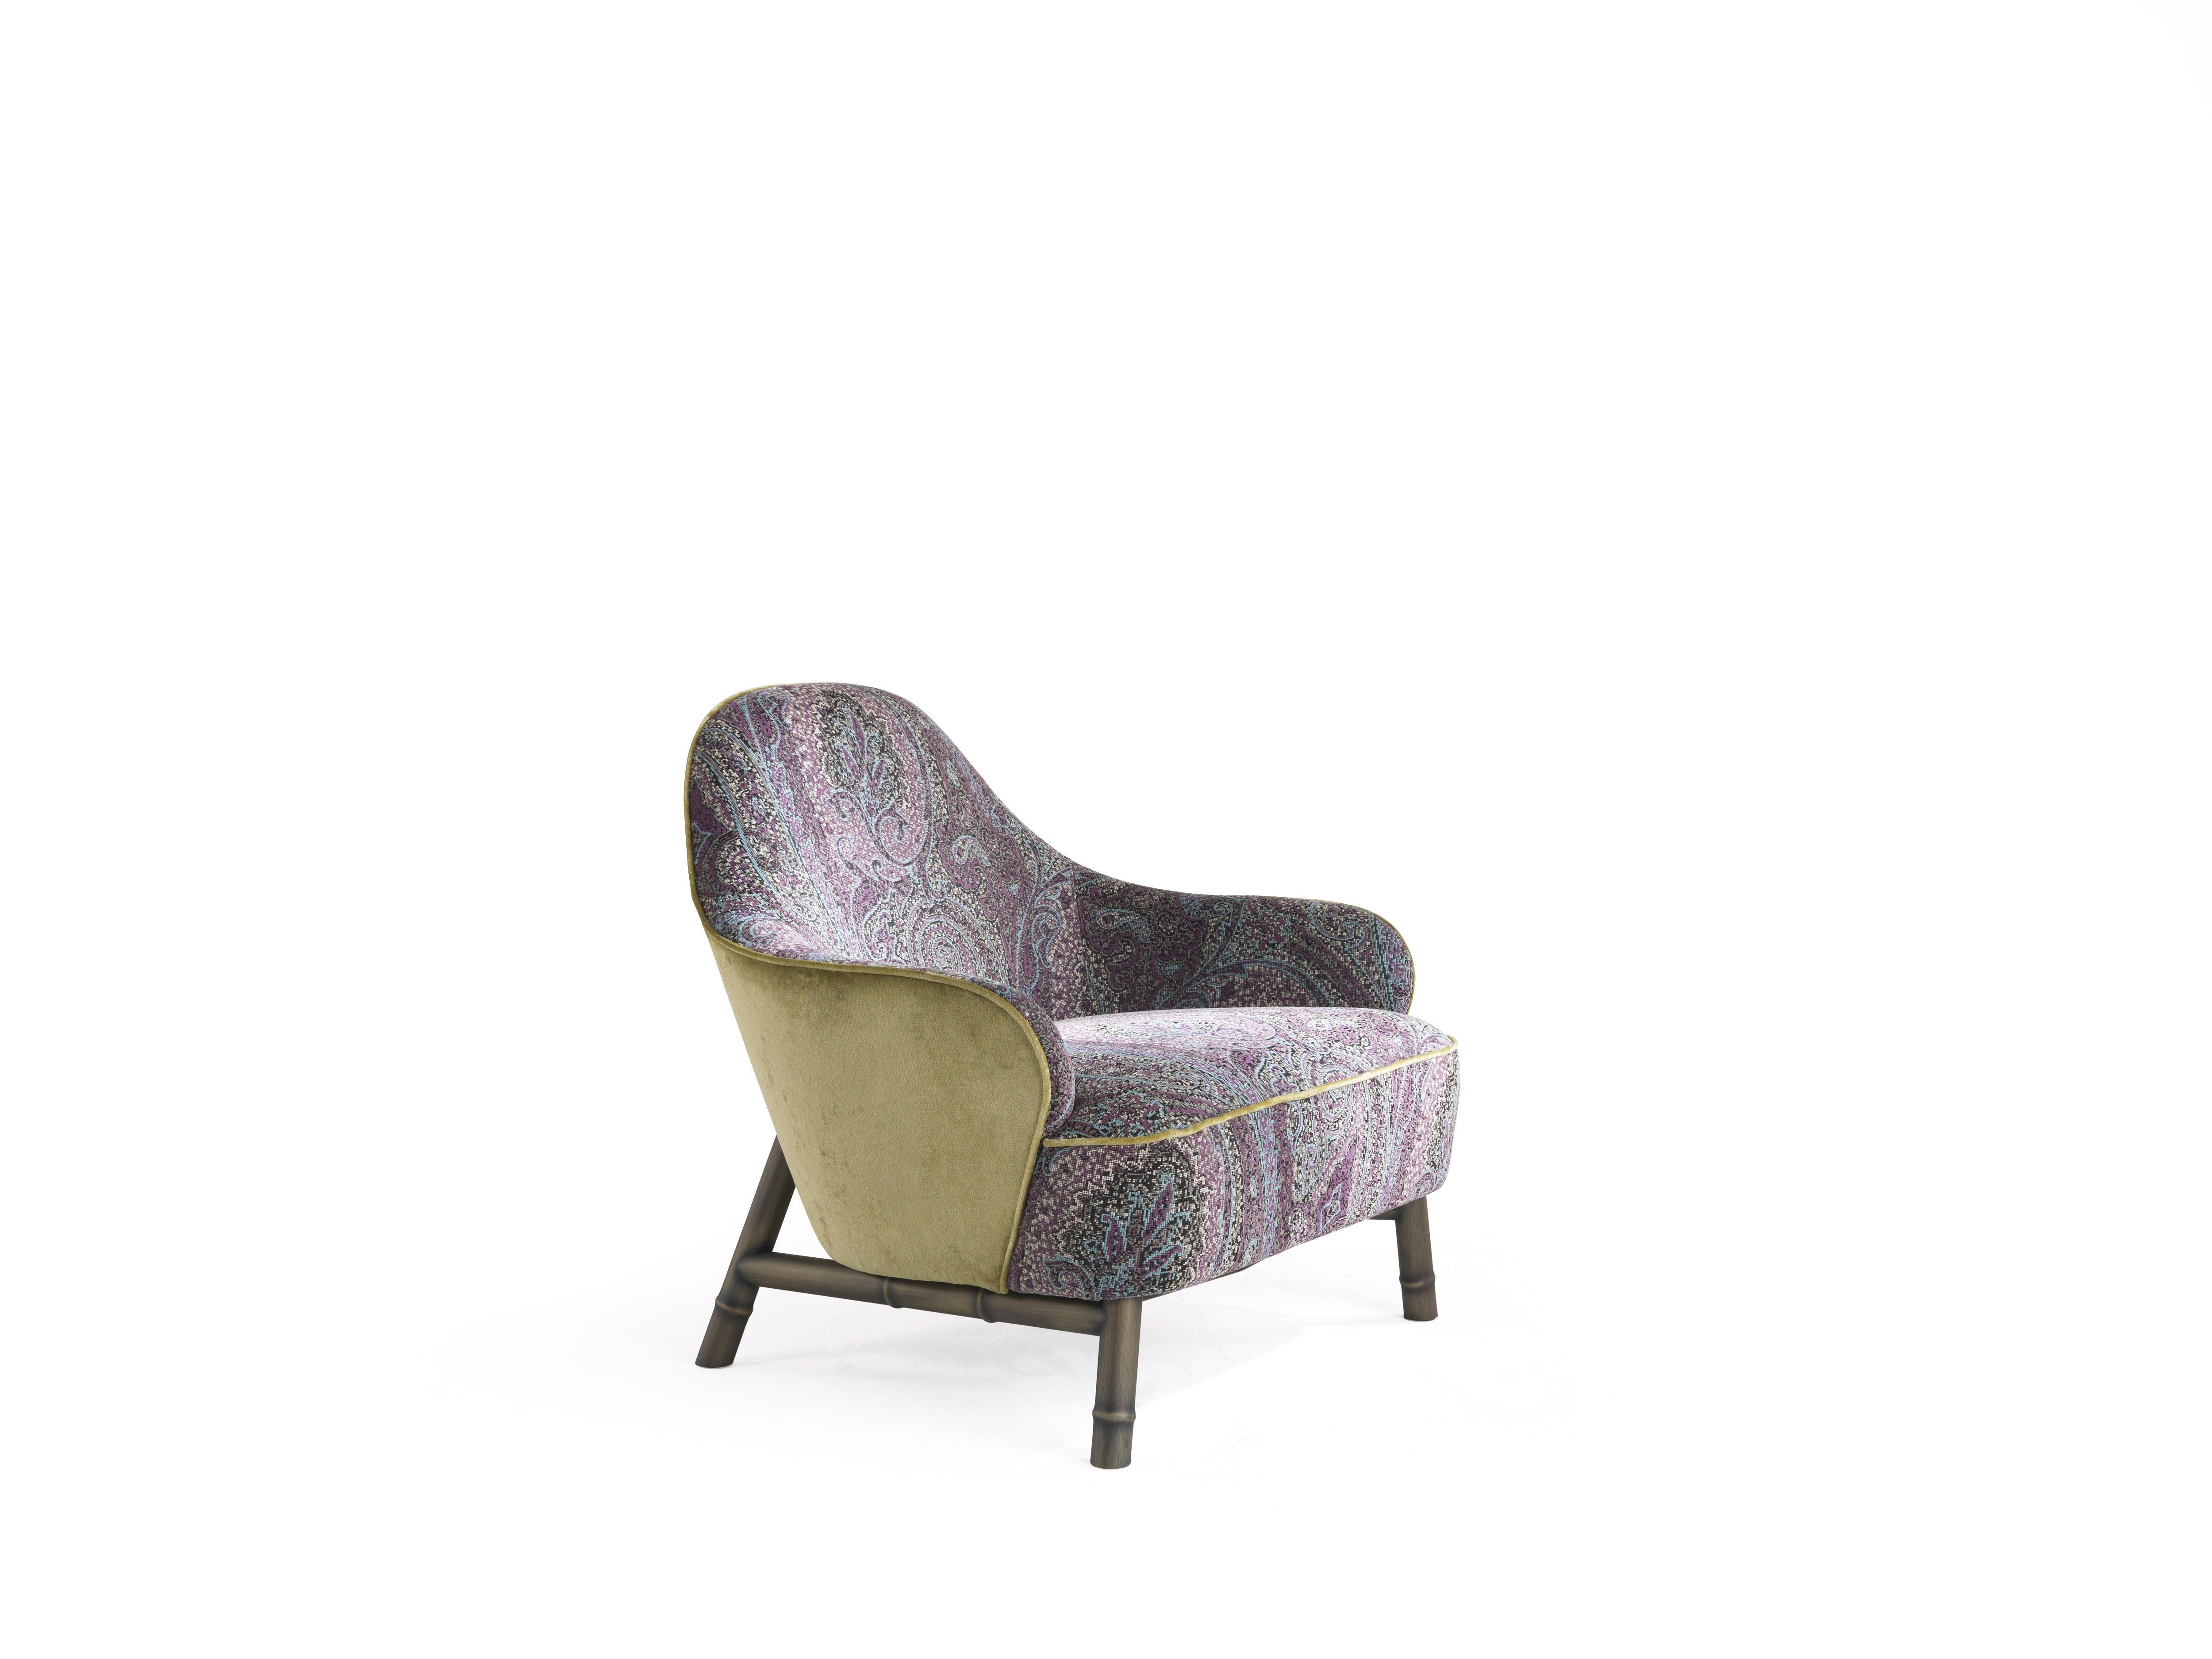 The rich and evocative fabric of the new Home Interiors Collection is the main feature of the Frida armchair, whose precious and inimitable style is enhanced by the velvet piping, by the bronzed finish legs with bamboo shape and by precious monkey